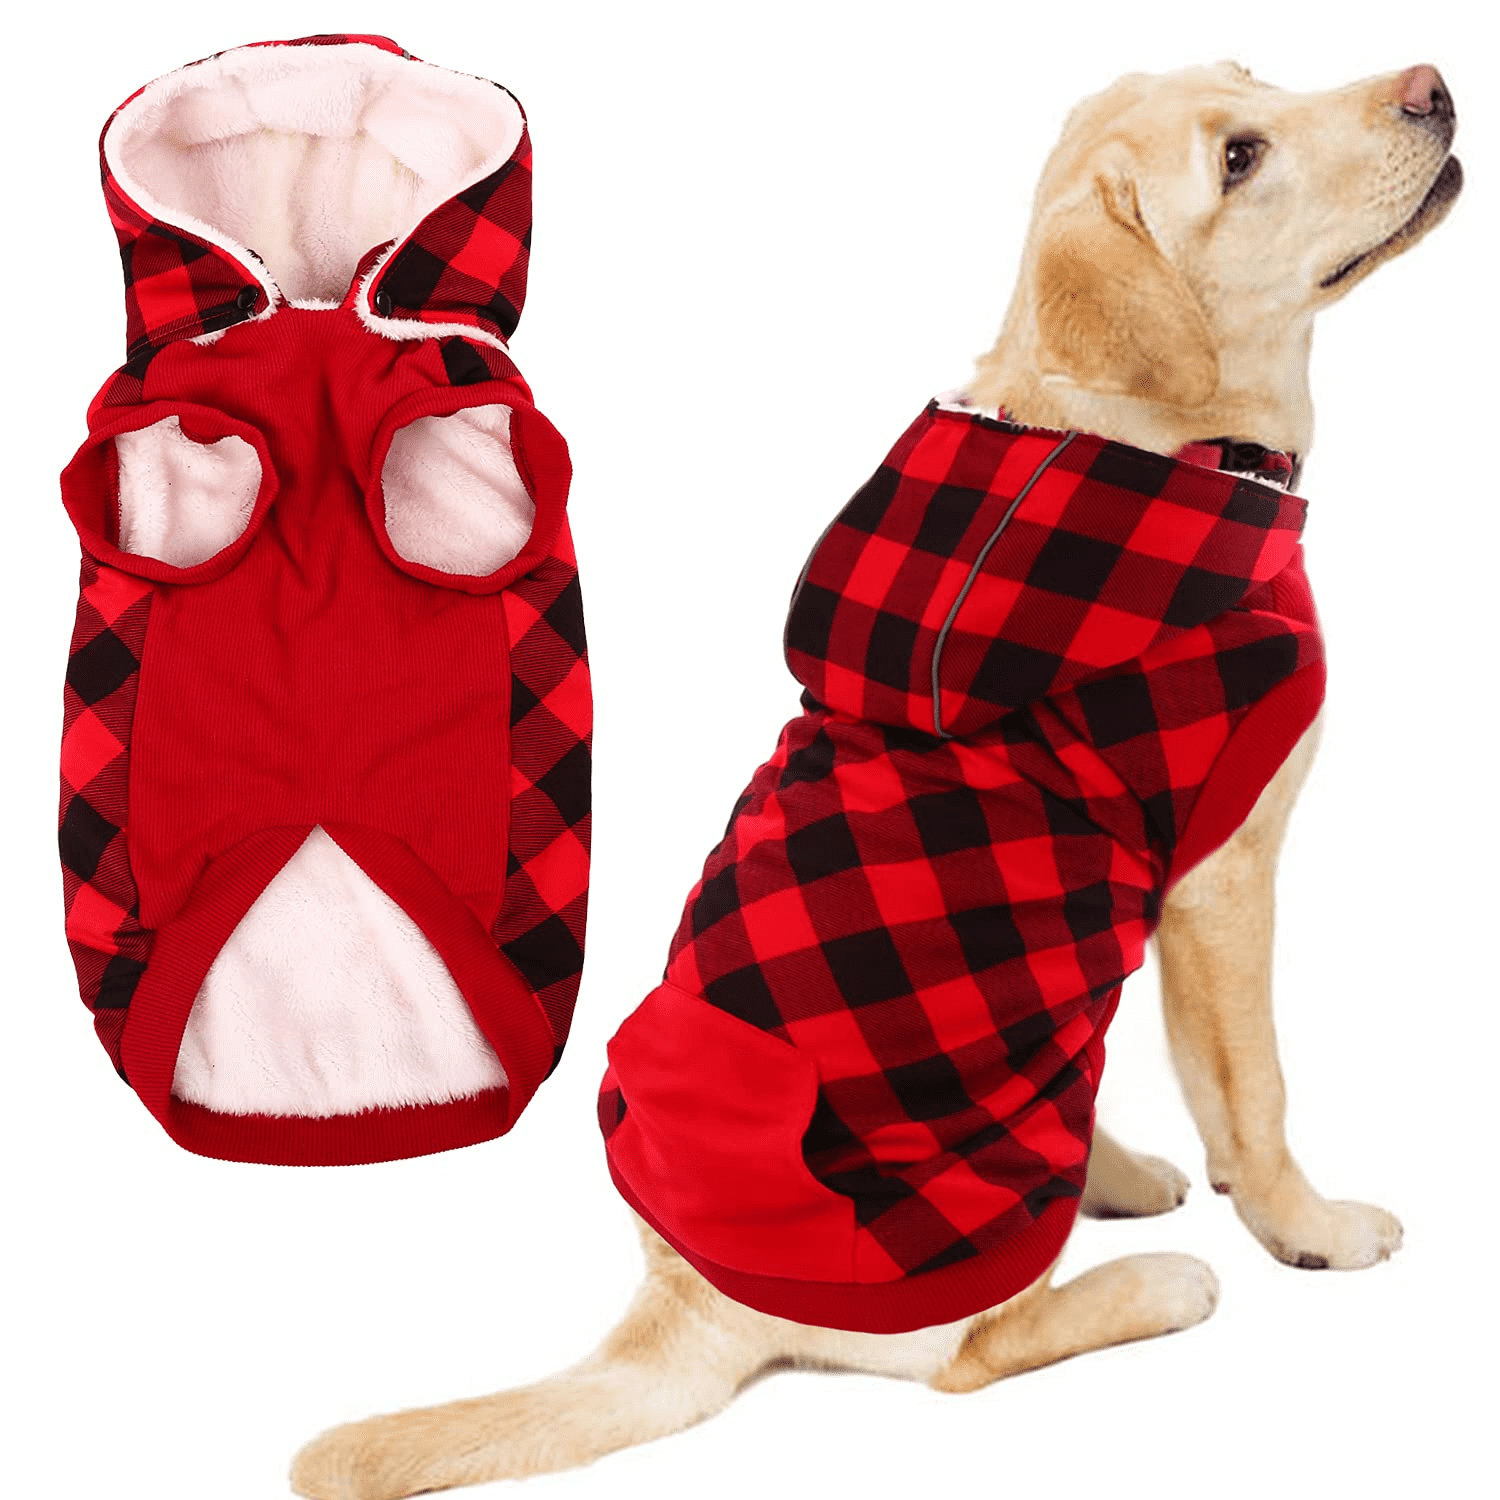 Pet Warm Fleece Jacket Thick Coat,Dog Winter Cold Weather with Detachable Hat,Adjustable Velcro for for Small,Medium and Large Dogs